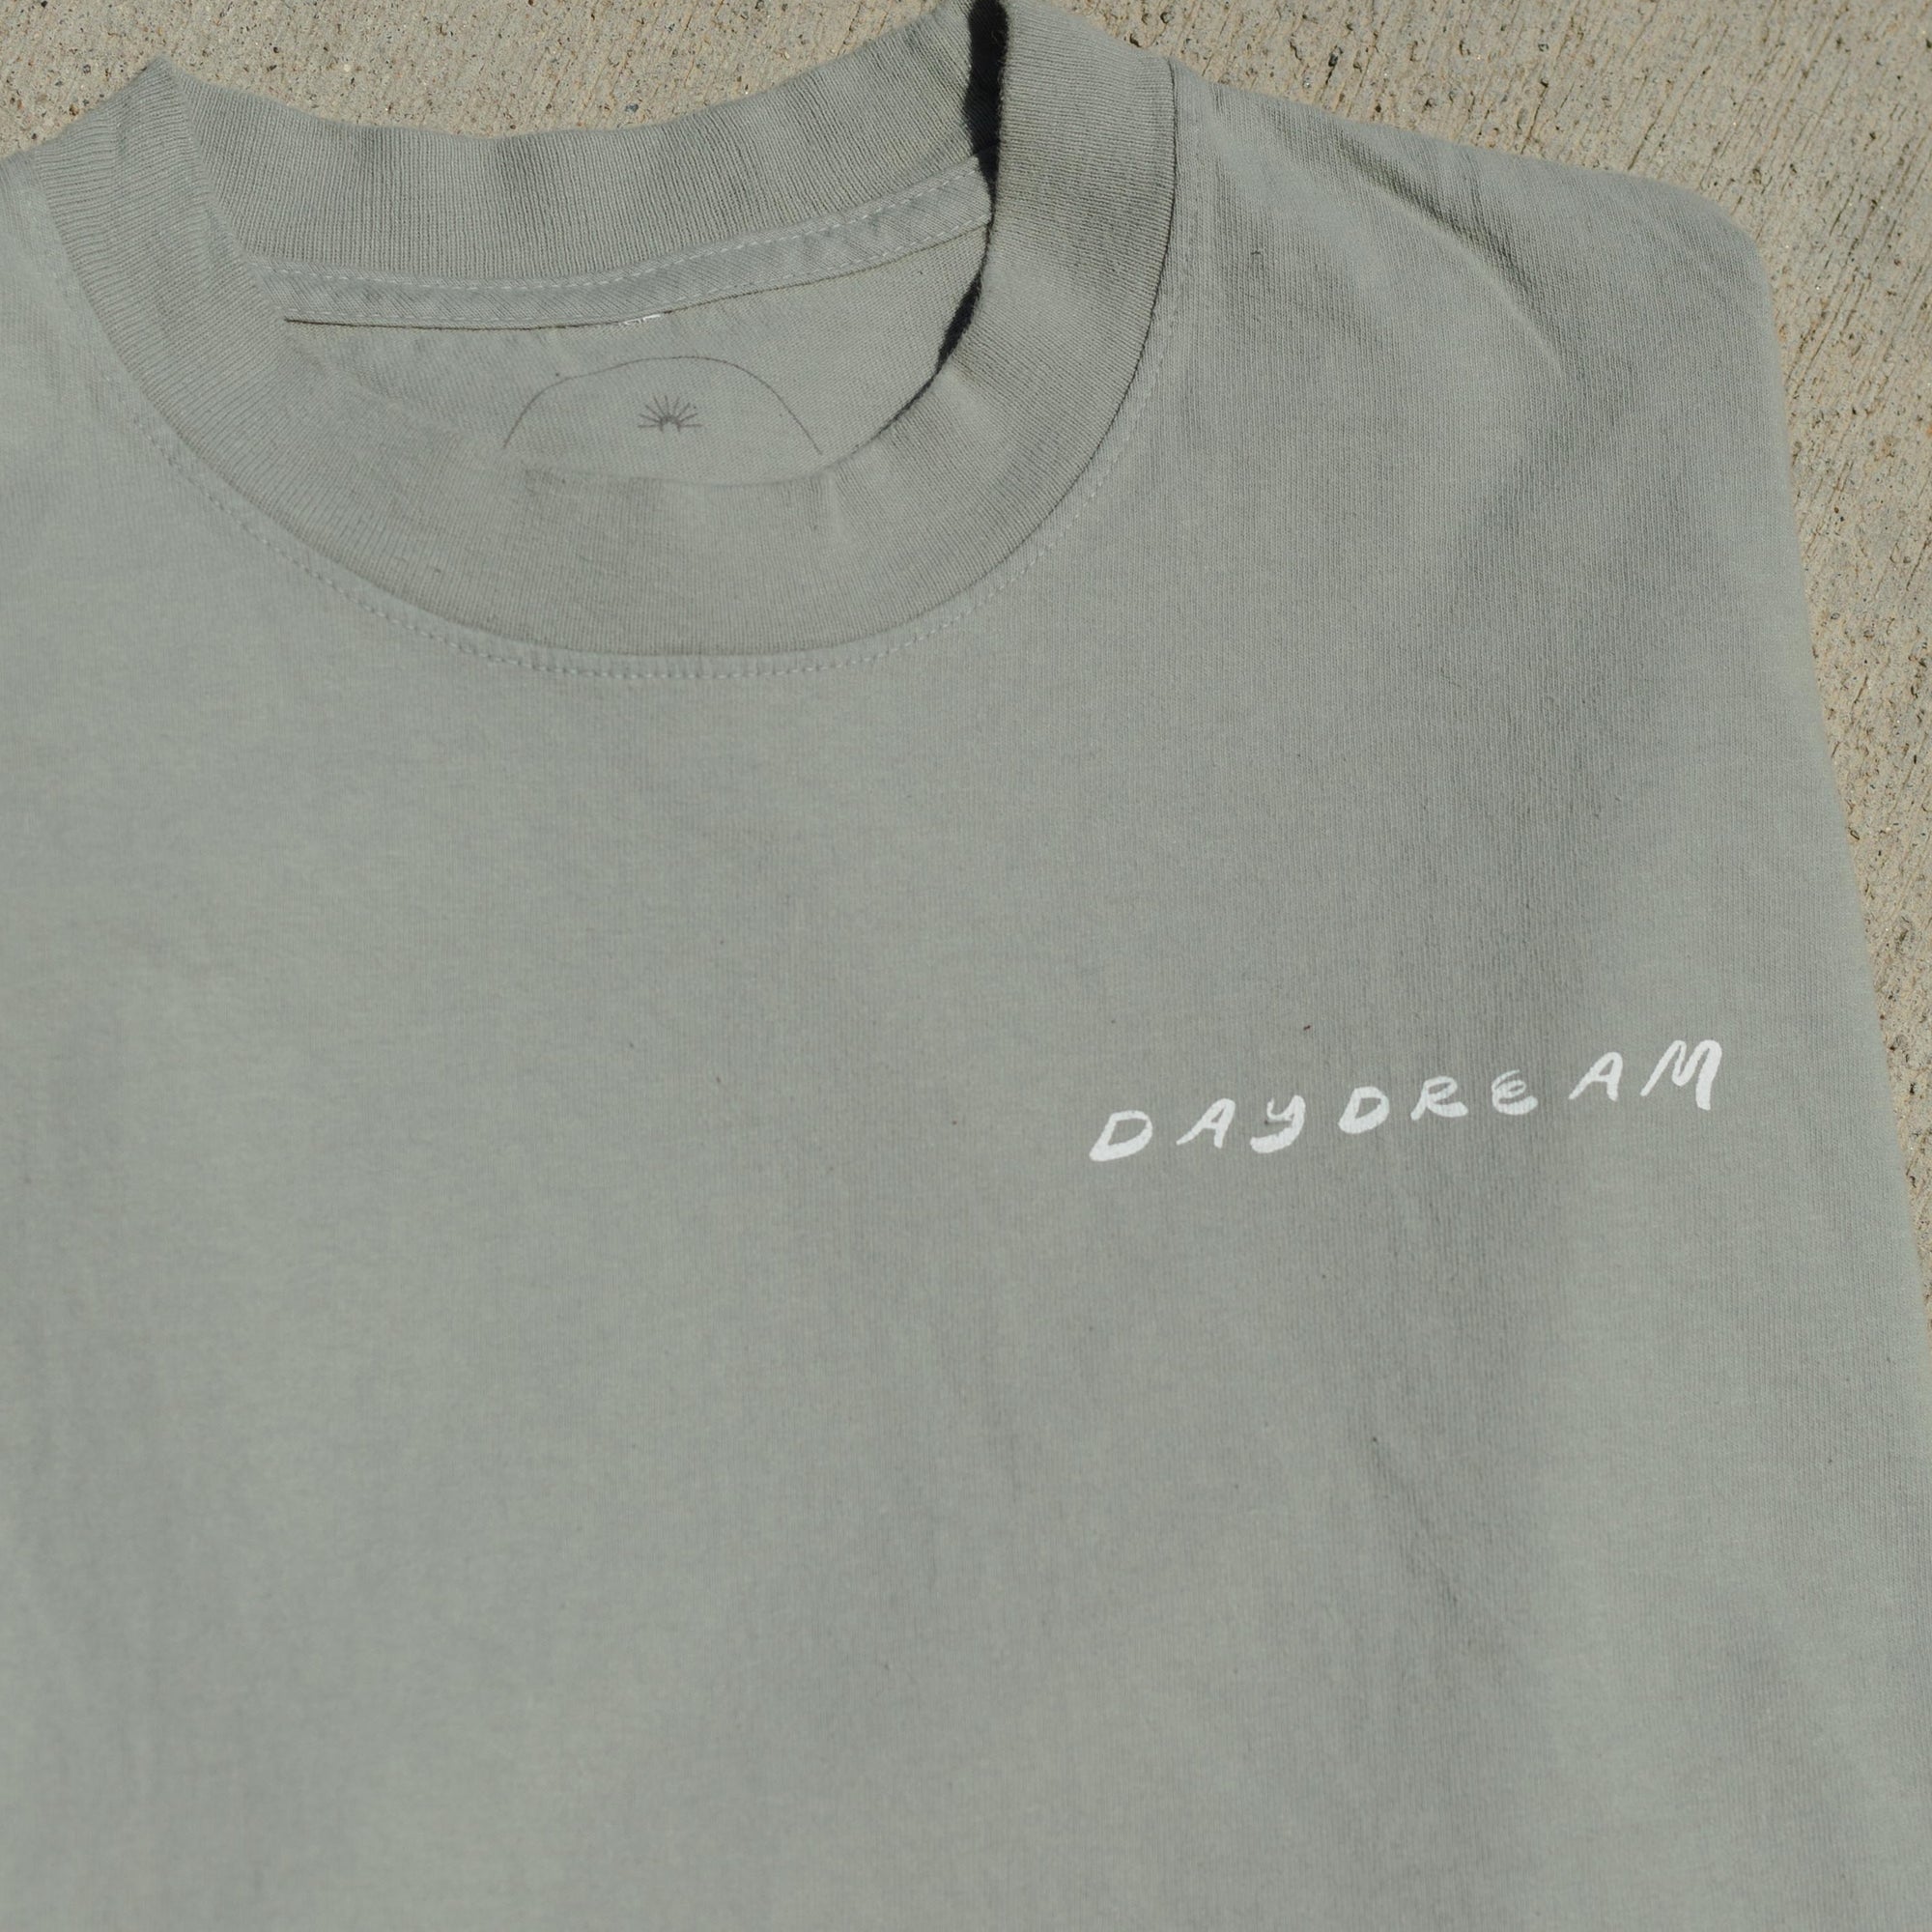 Daydream Down the Line Tee - Sage Green